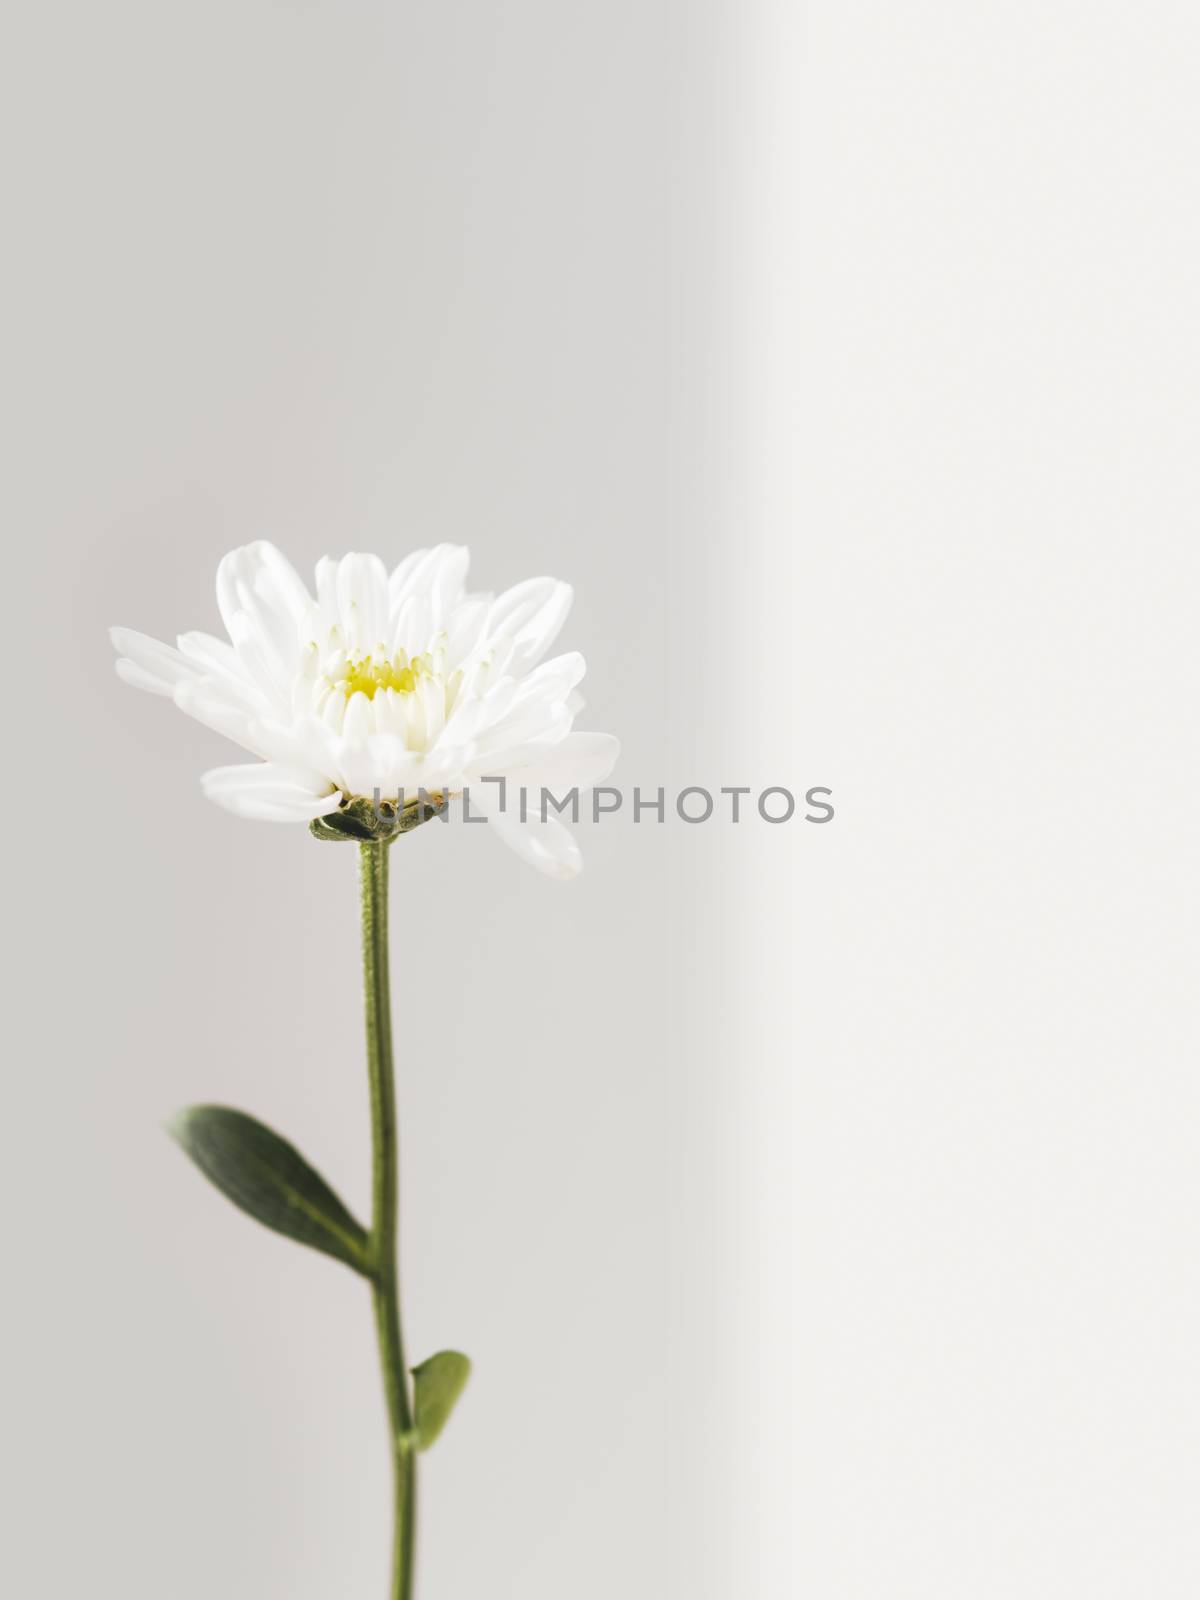 Fragile chrysanthemum flower. Blooming flower on grey background with copy space. Light and shadow.